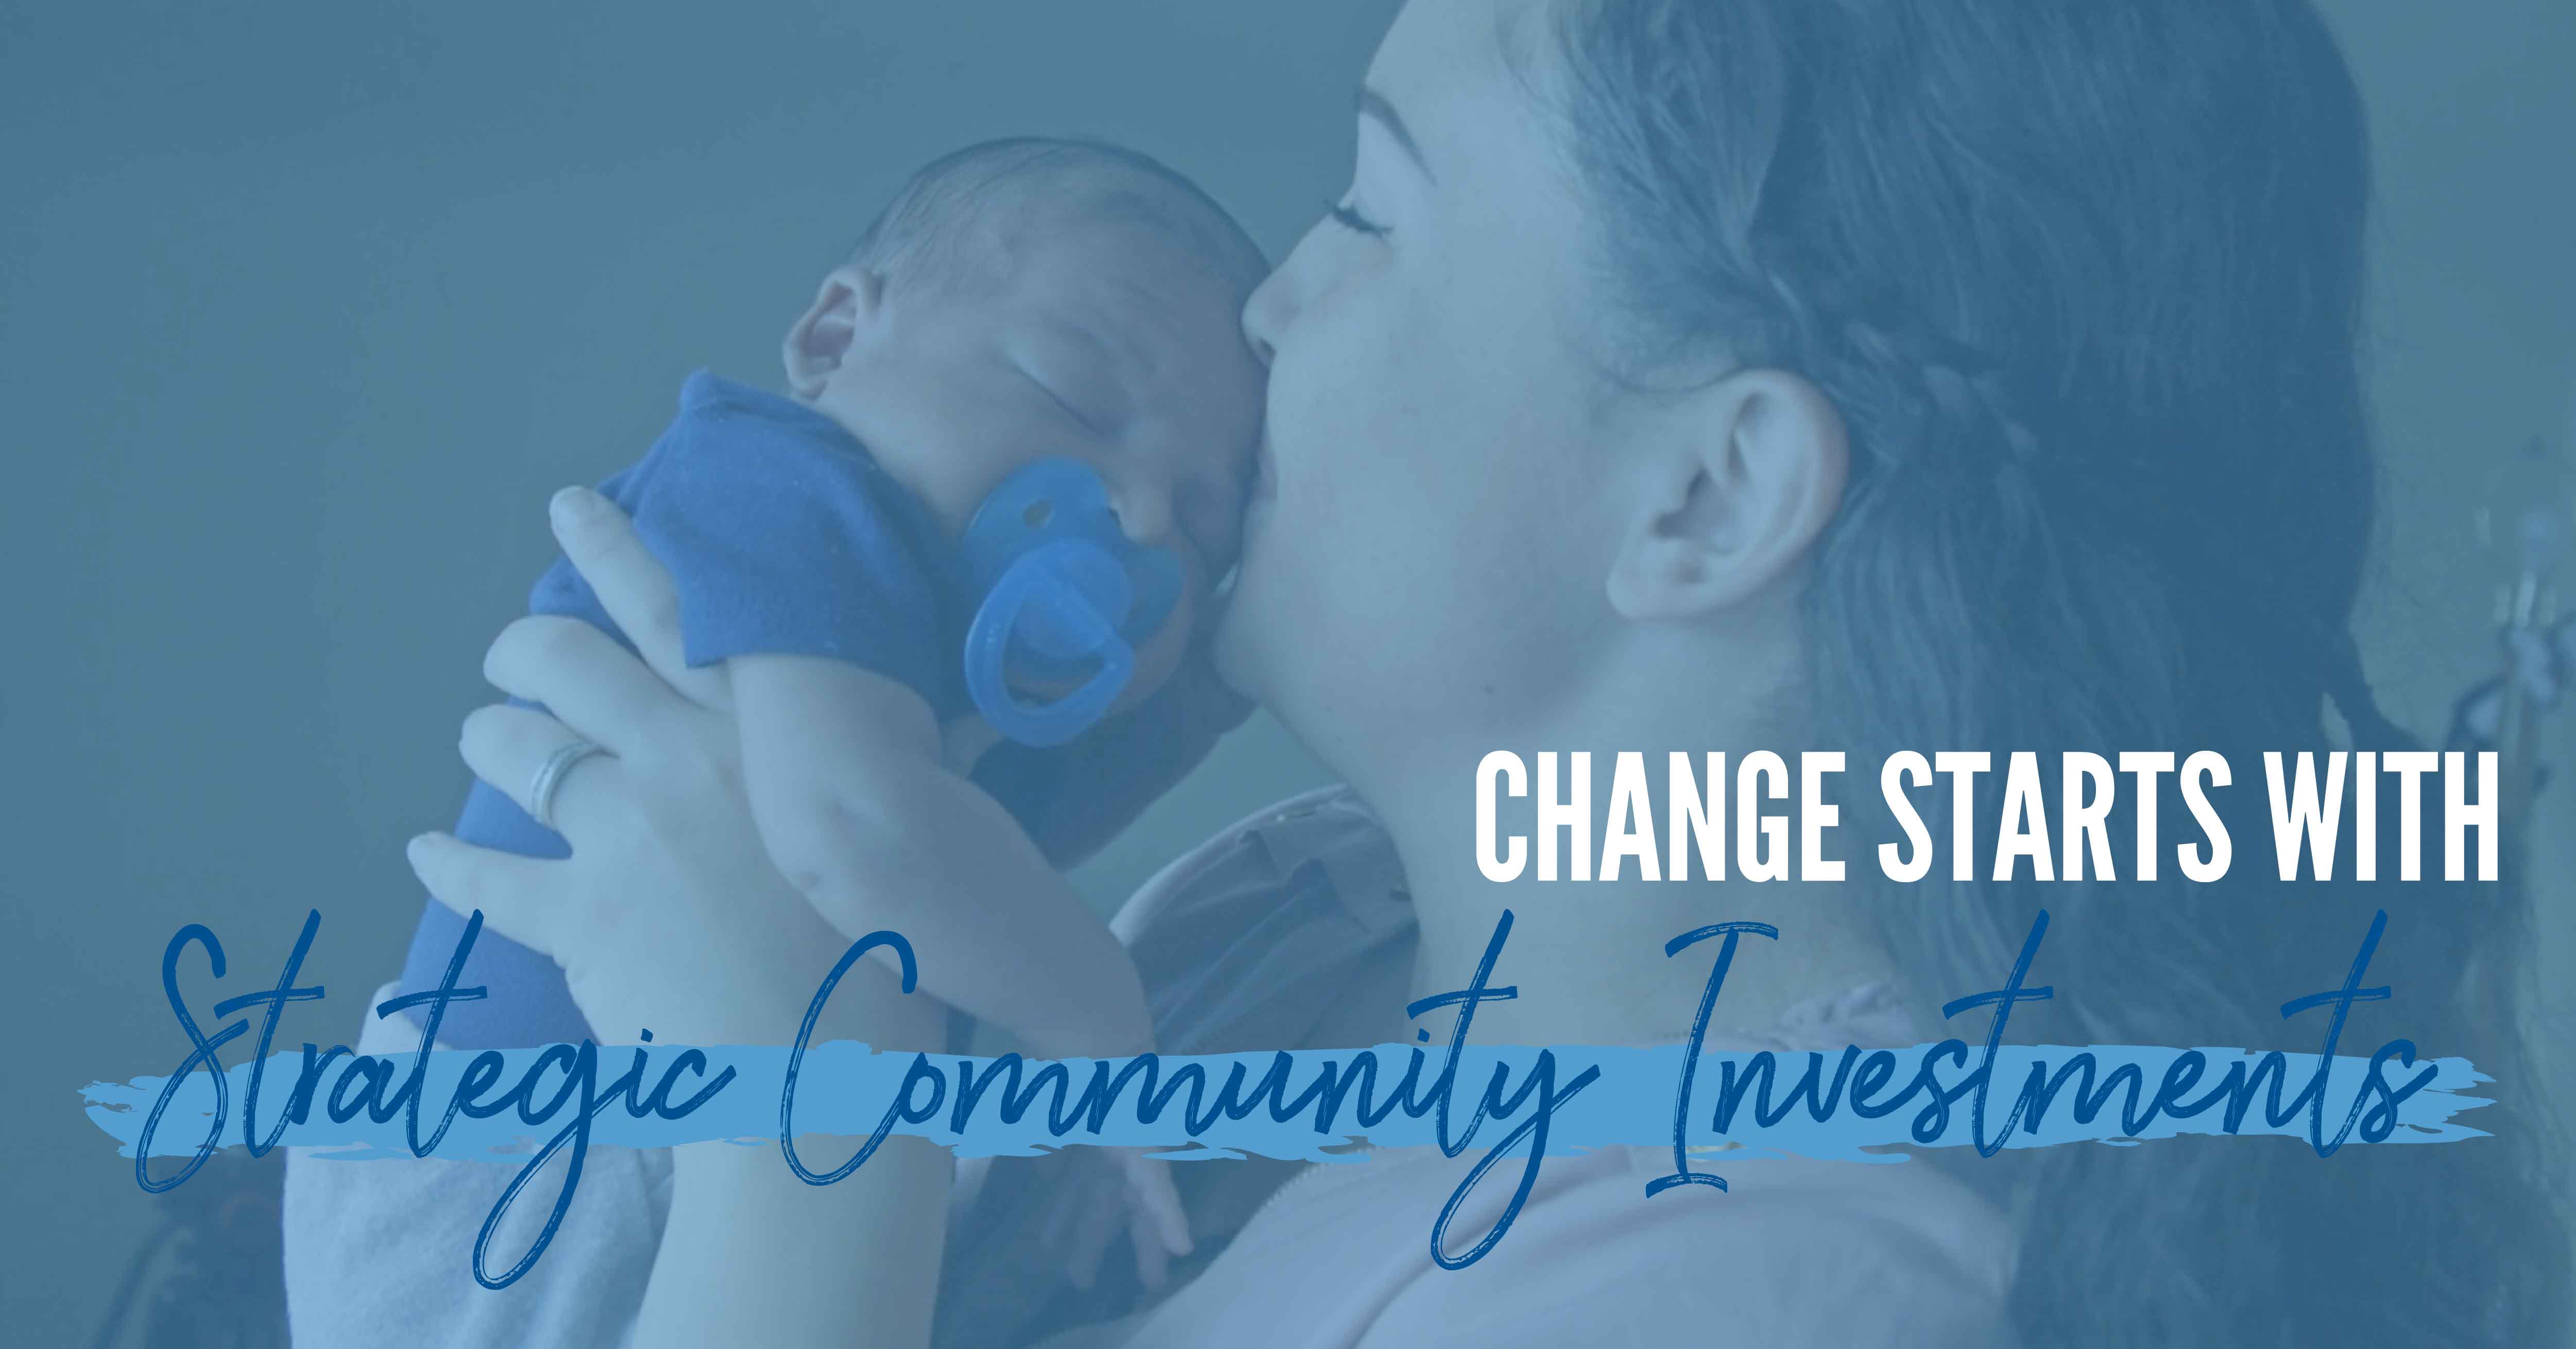 Picture of mom & baby with blue overlay and the words "change starts with strategic community investments"